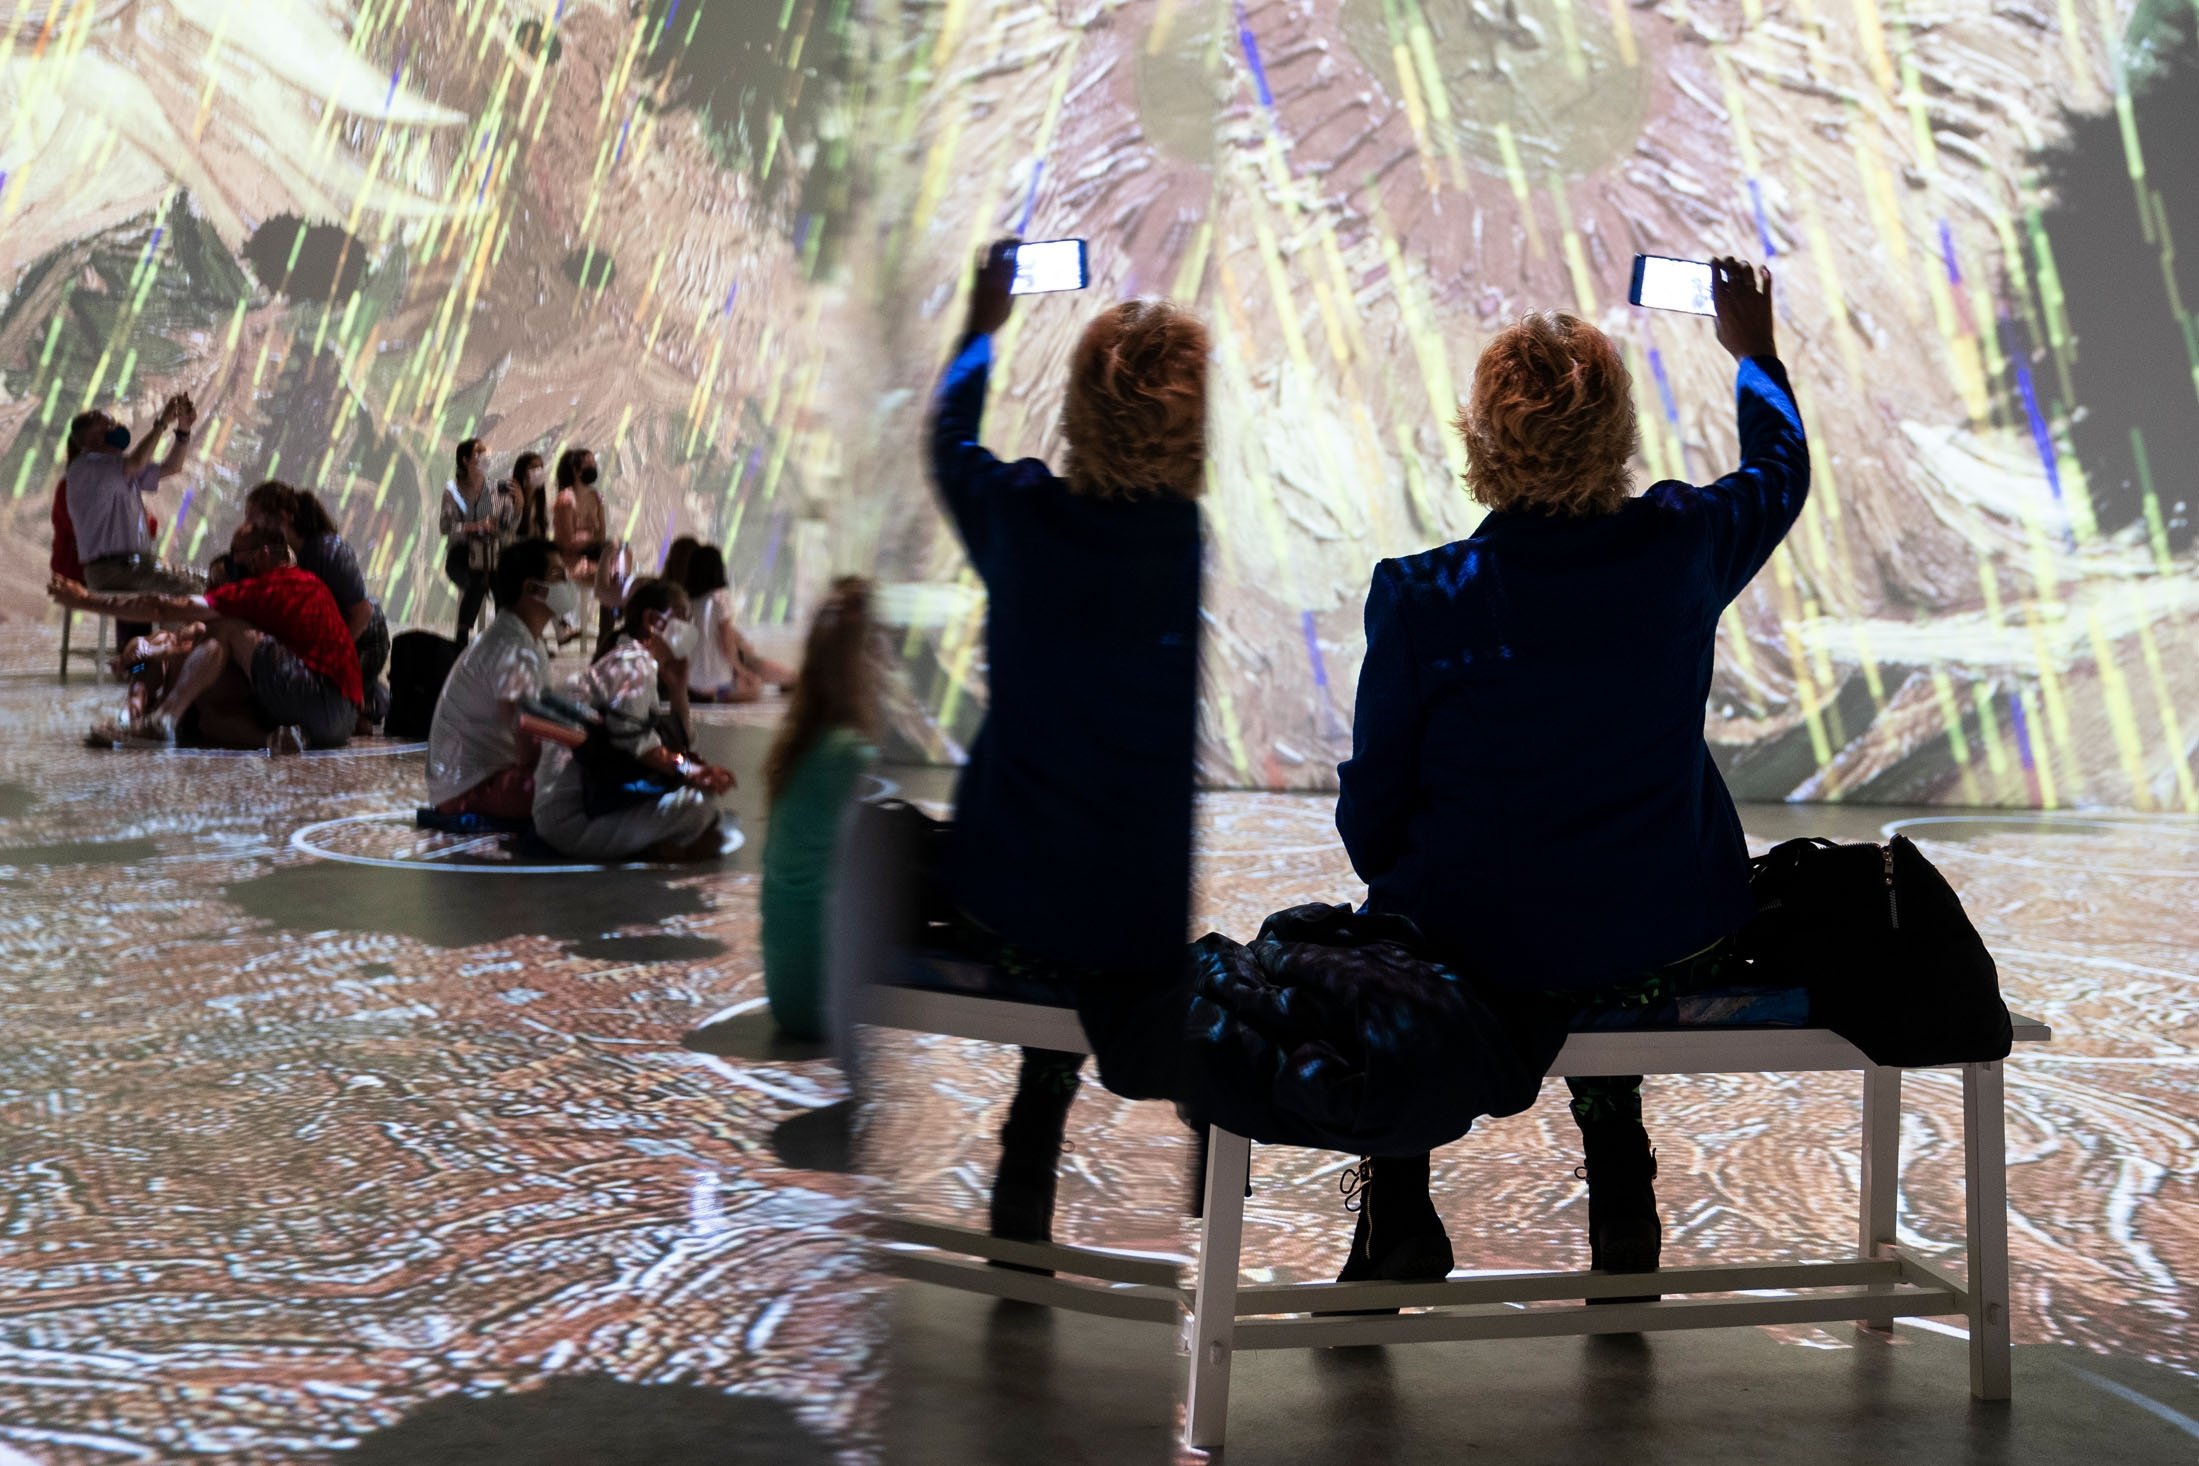 Projections of selected works of celebrated painter Vincent Van Gogh are displayed at a preview of the "Immersive Van Gogh" exhibit at Pier 36 in New York, U.S., June 4, 2021. (AP Photo)